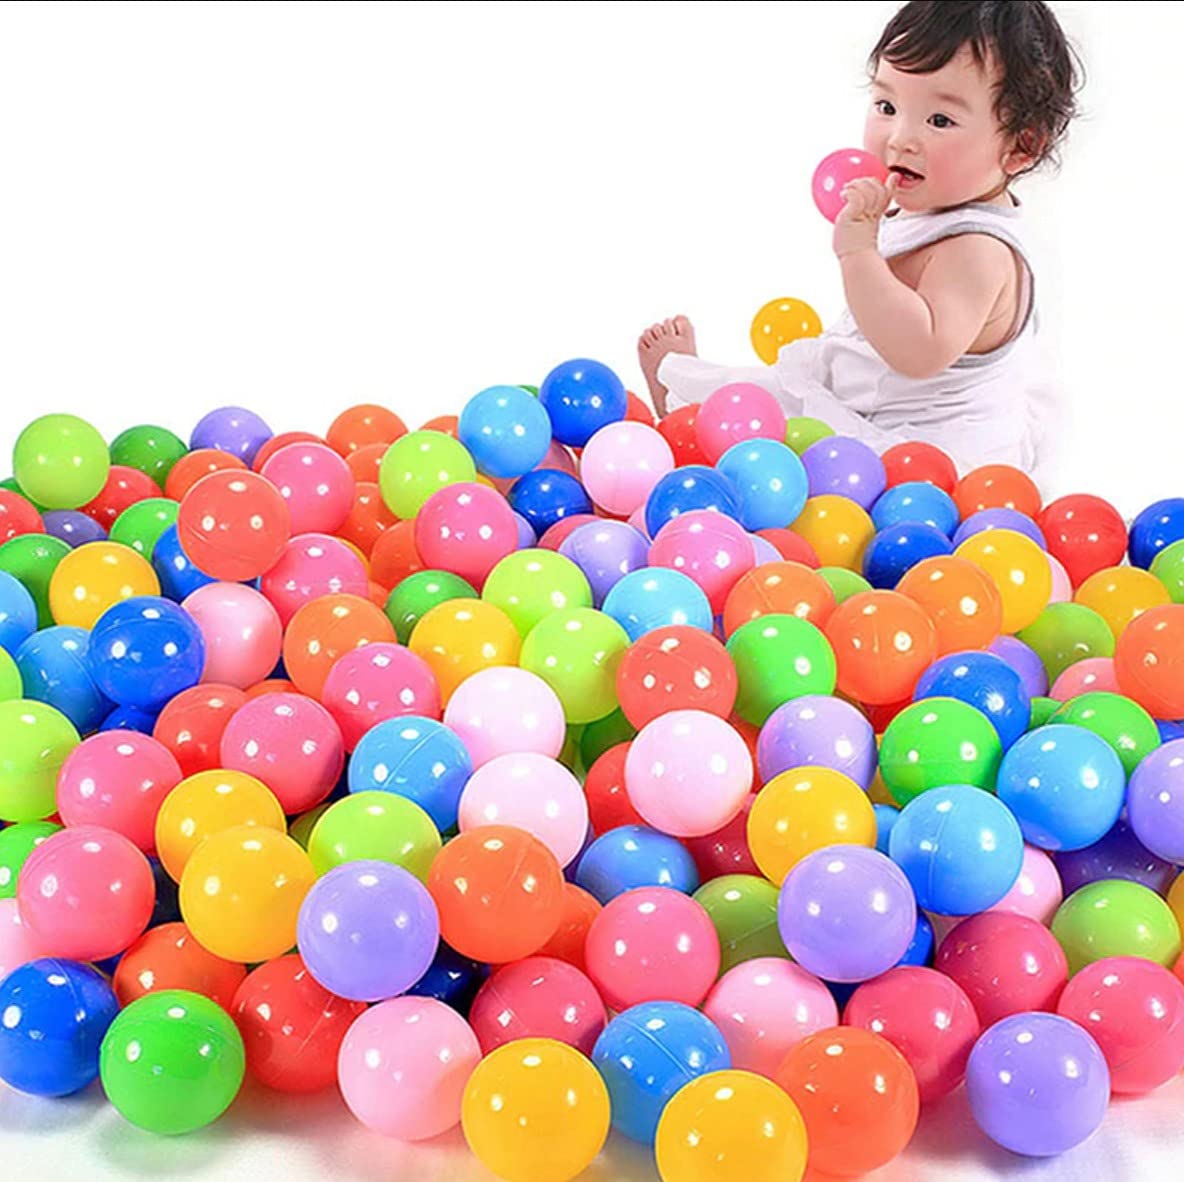 Large Size ABS Plastic Multi-Colored Balls for Ball Pool,Swimming Pool for Kids ( 80 mm 100 Balls)